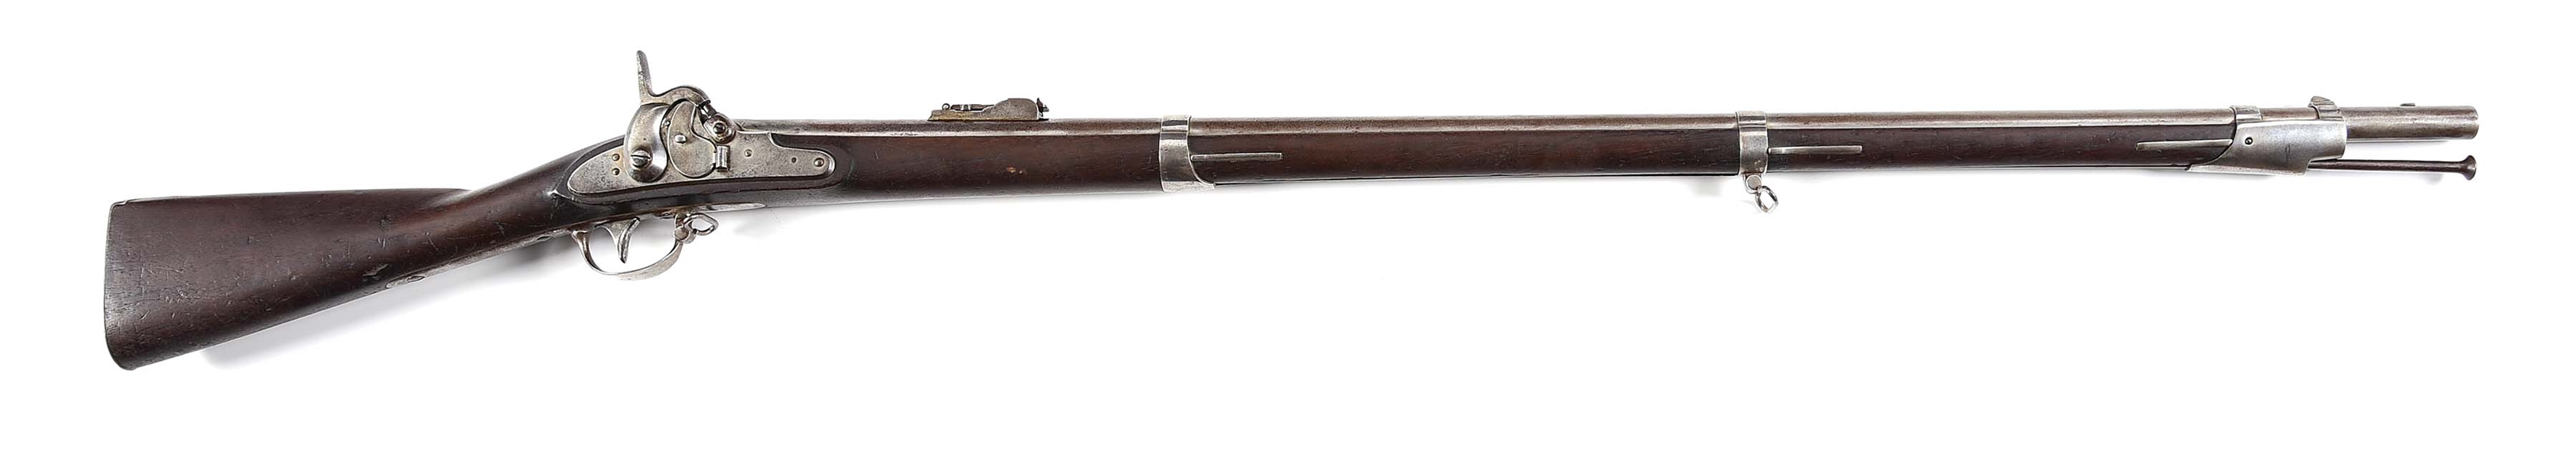 (A) RARE STATE OF NEW JERSEY CONTRACT REMINGTON ALTERATION RIFLED AND SIGHTED MUSKET.